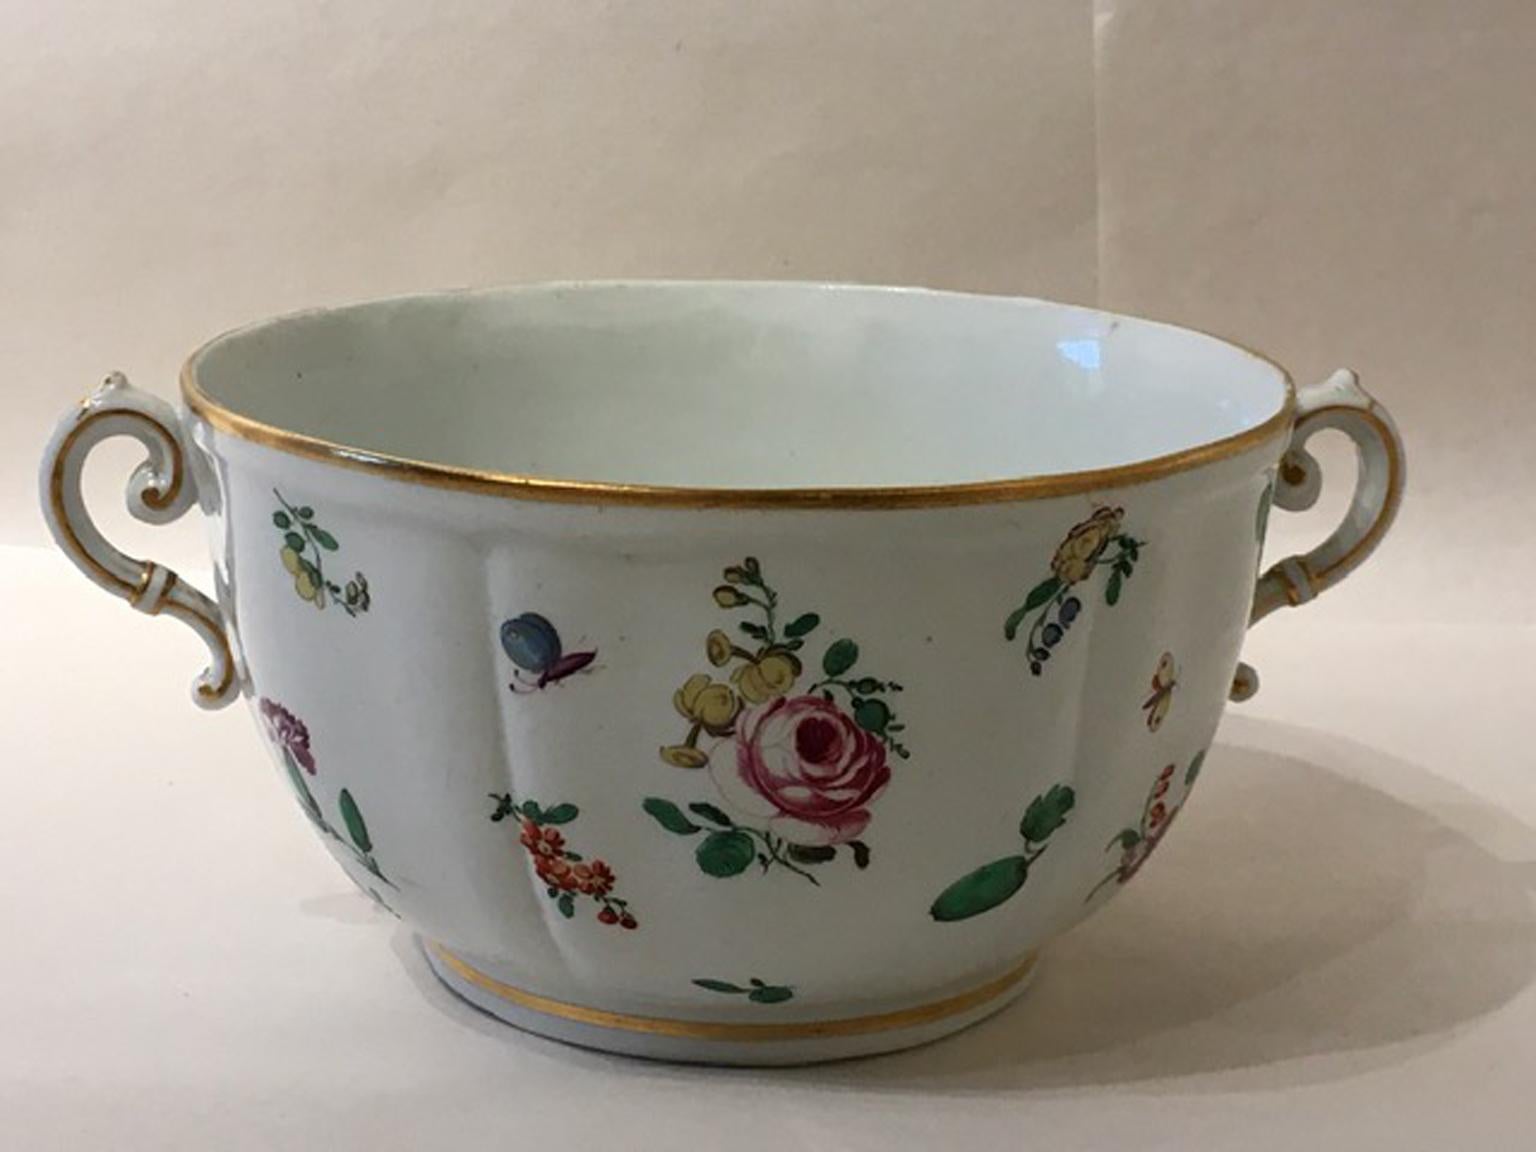 Italy Richard Ginori Mid-19th Century Porcelain Covered For Sale 5